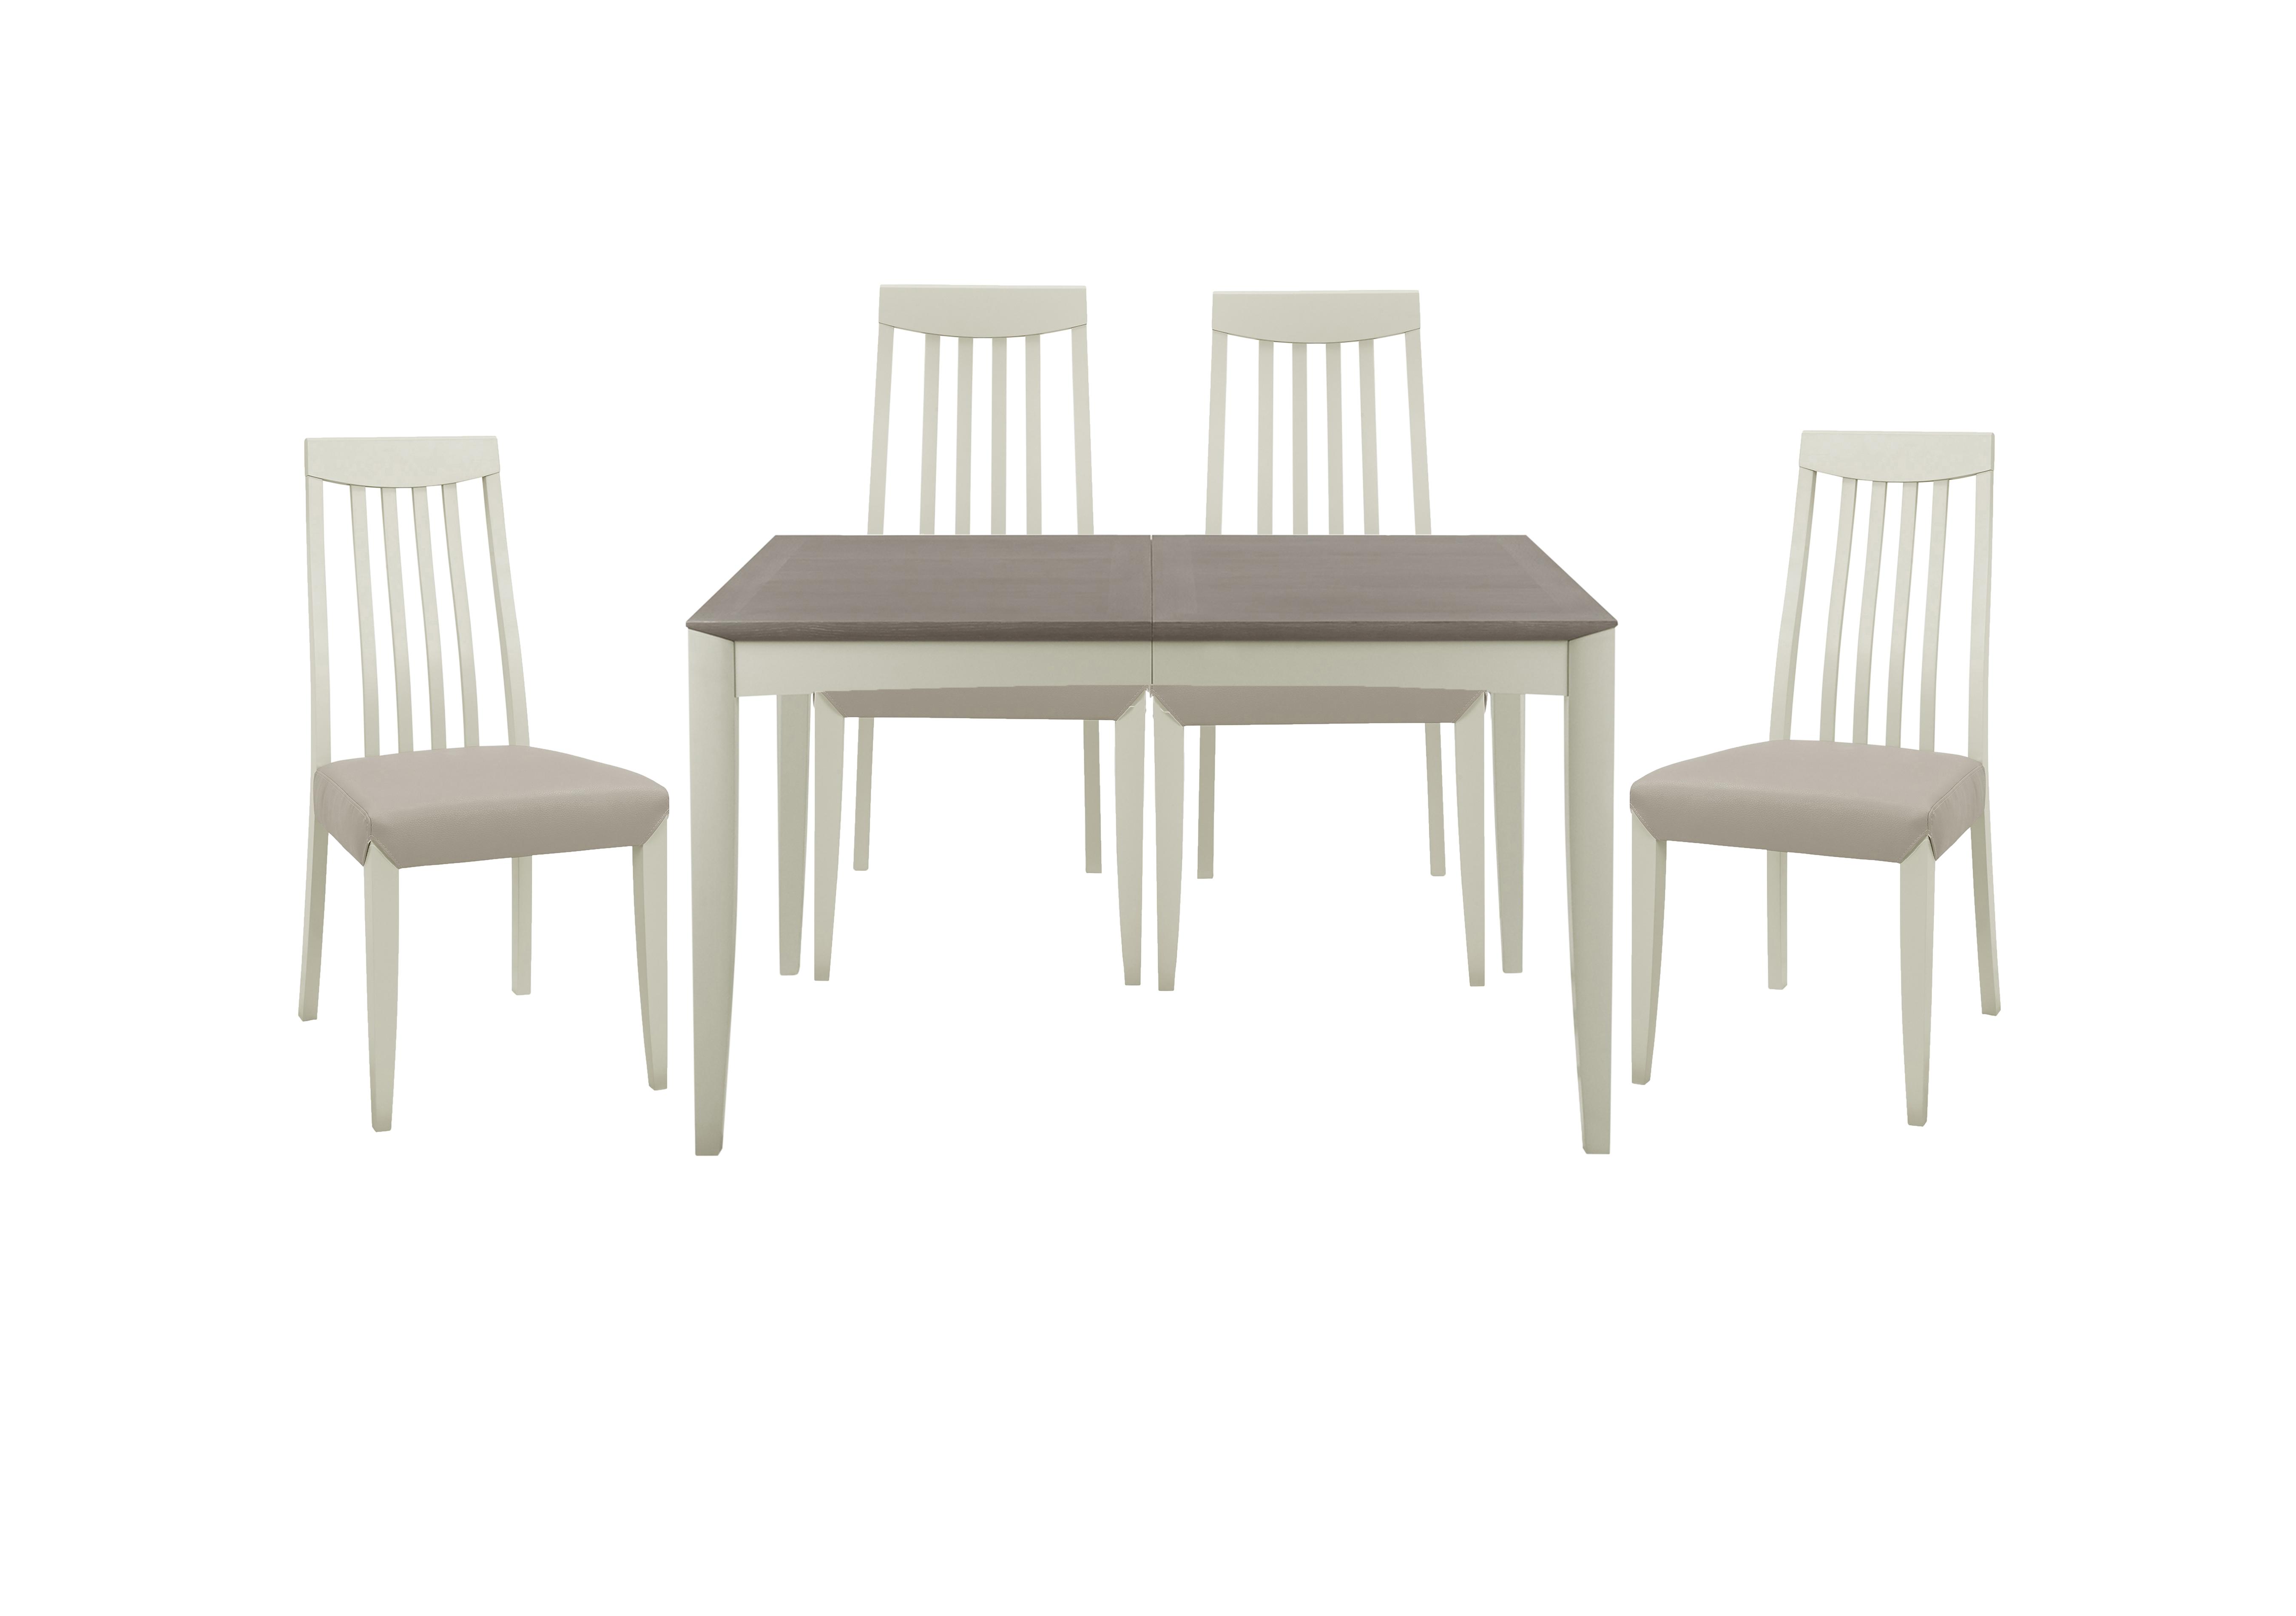 Skye Medium Table and 4 Tall Chairs in Two Tone/Grey on Furniture Village